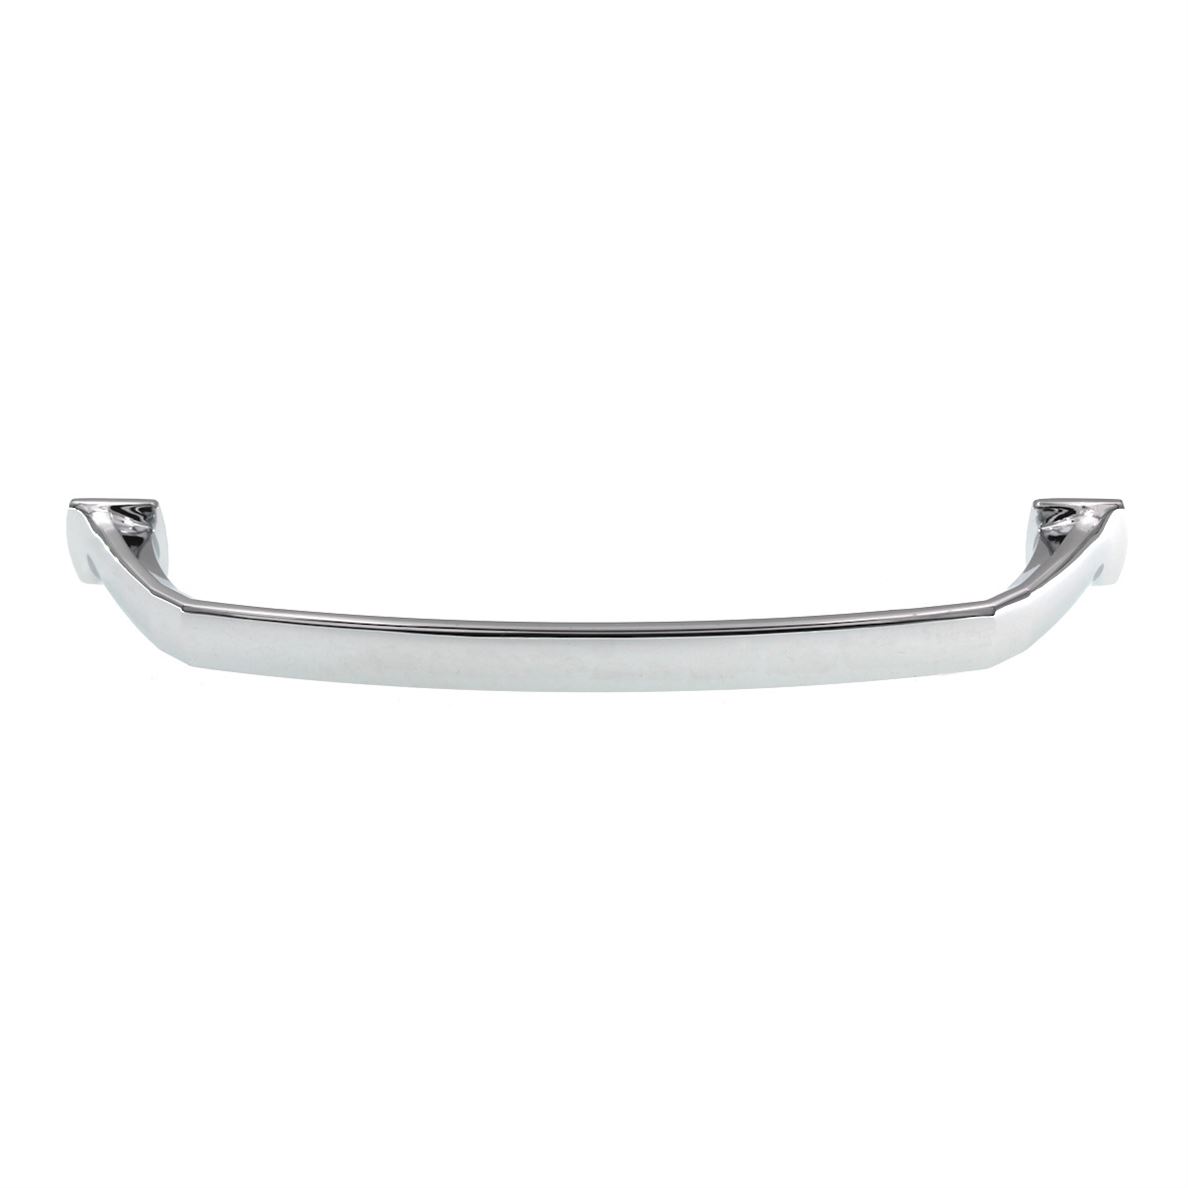 Pride Madison Cabinet Arch Pull 6 1/4" (160mm) Ctr Polished Chrome P93160-PC